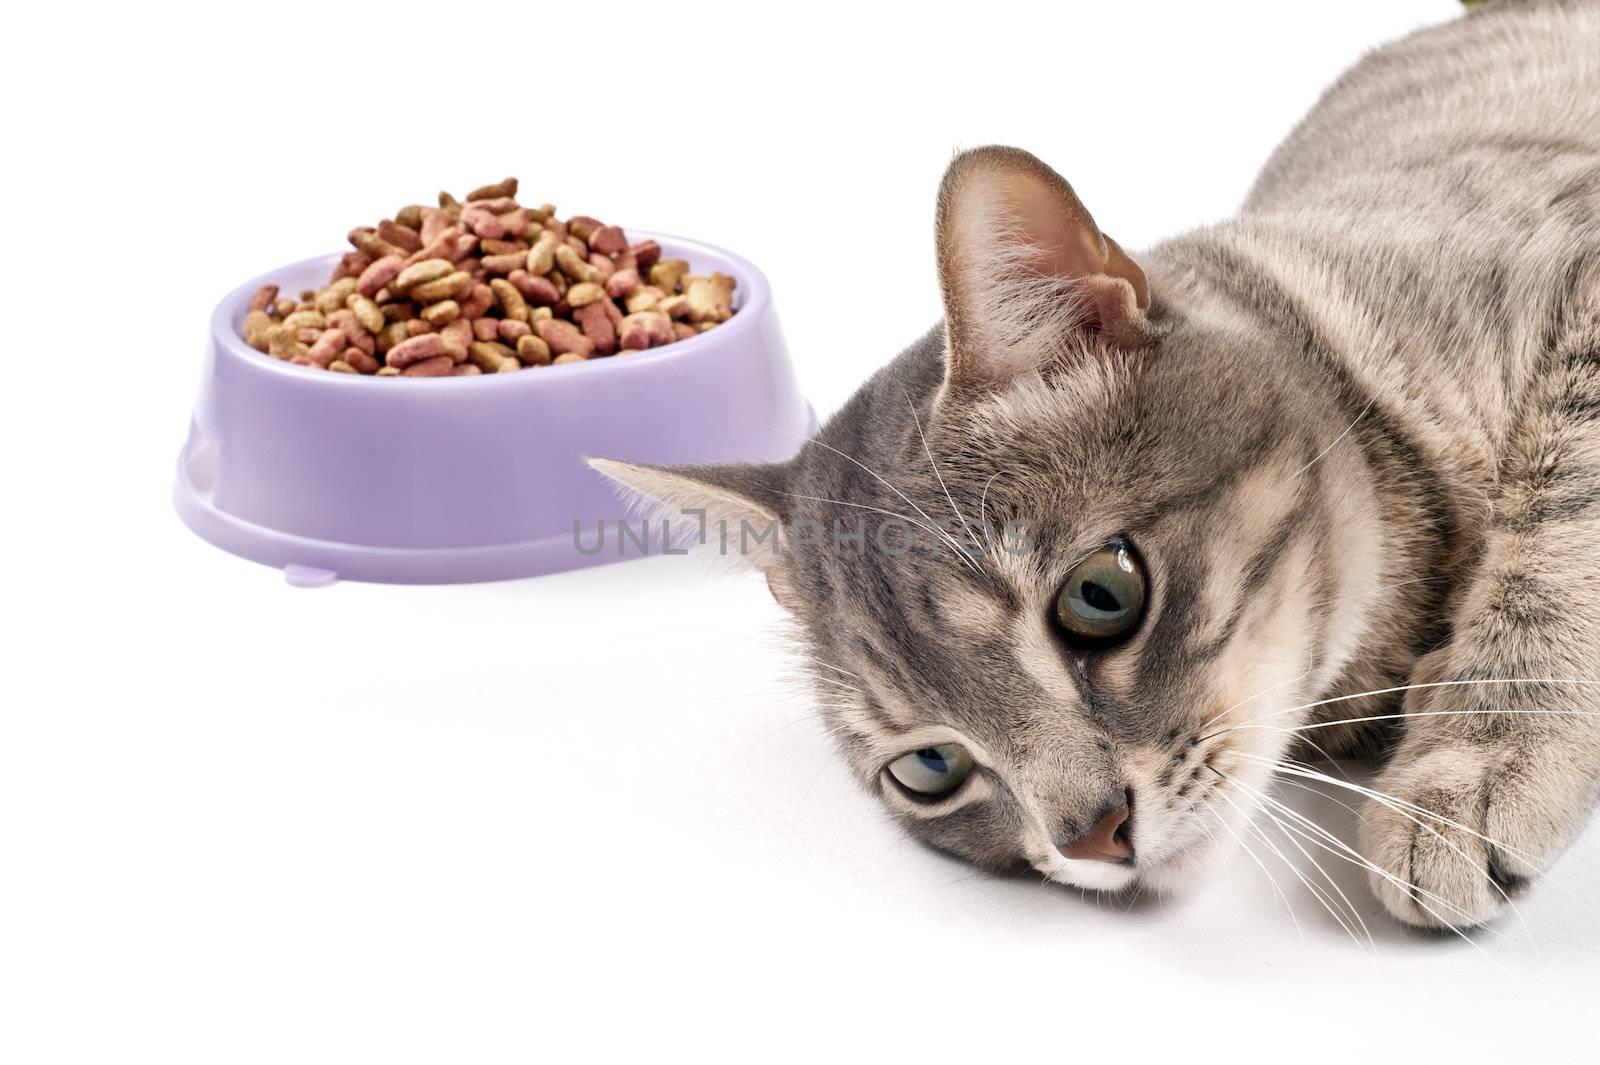 The cat lies near a bowl with food and doesn't want to eat